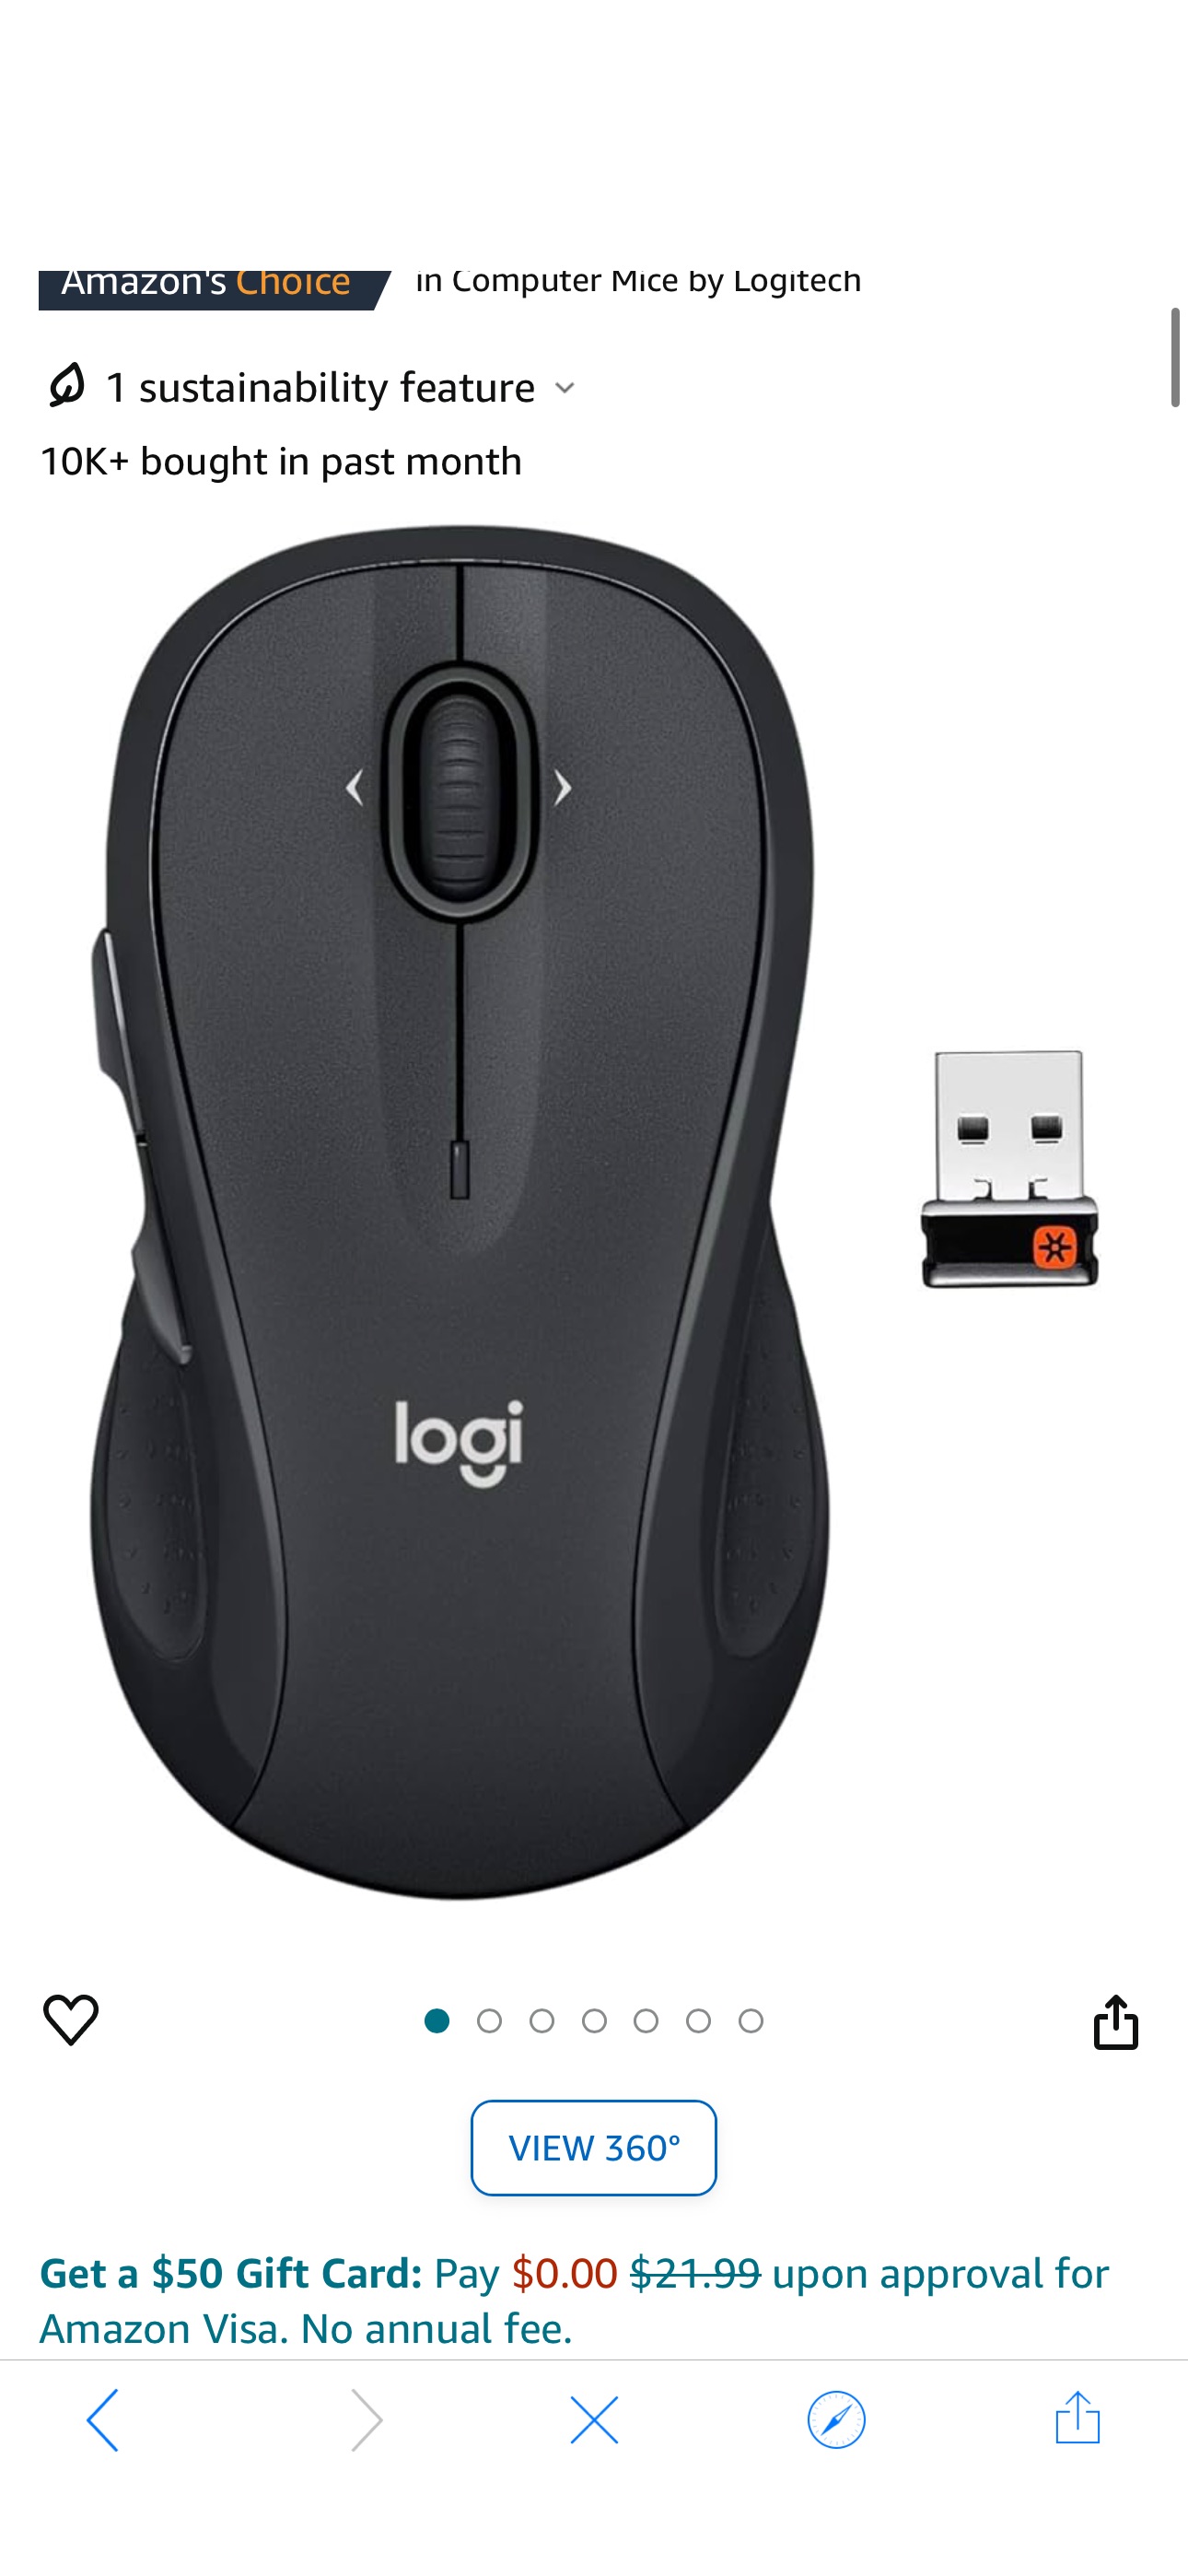 Amazon.com: Logitech M510 Wireless Computer Mouse for PC with USB Unifying Receiver - Graphite : Electronics